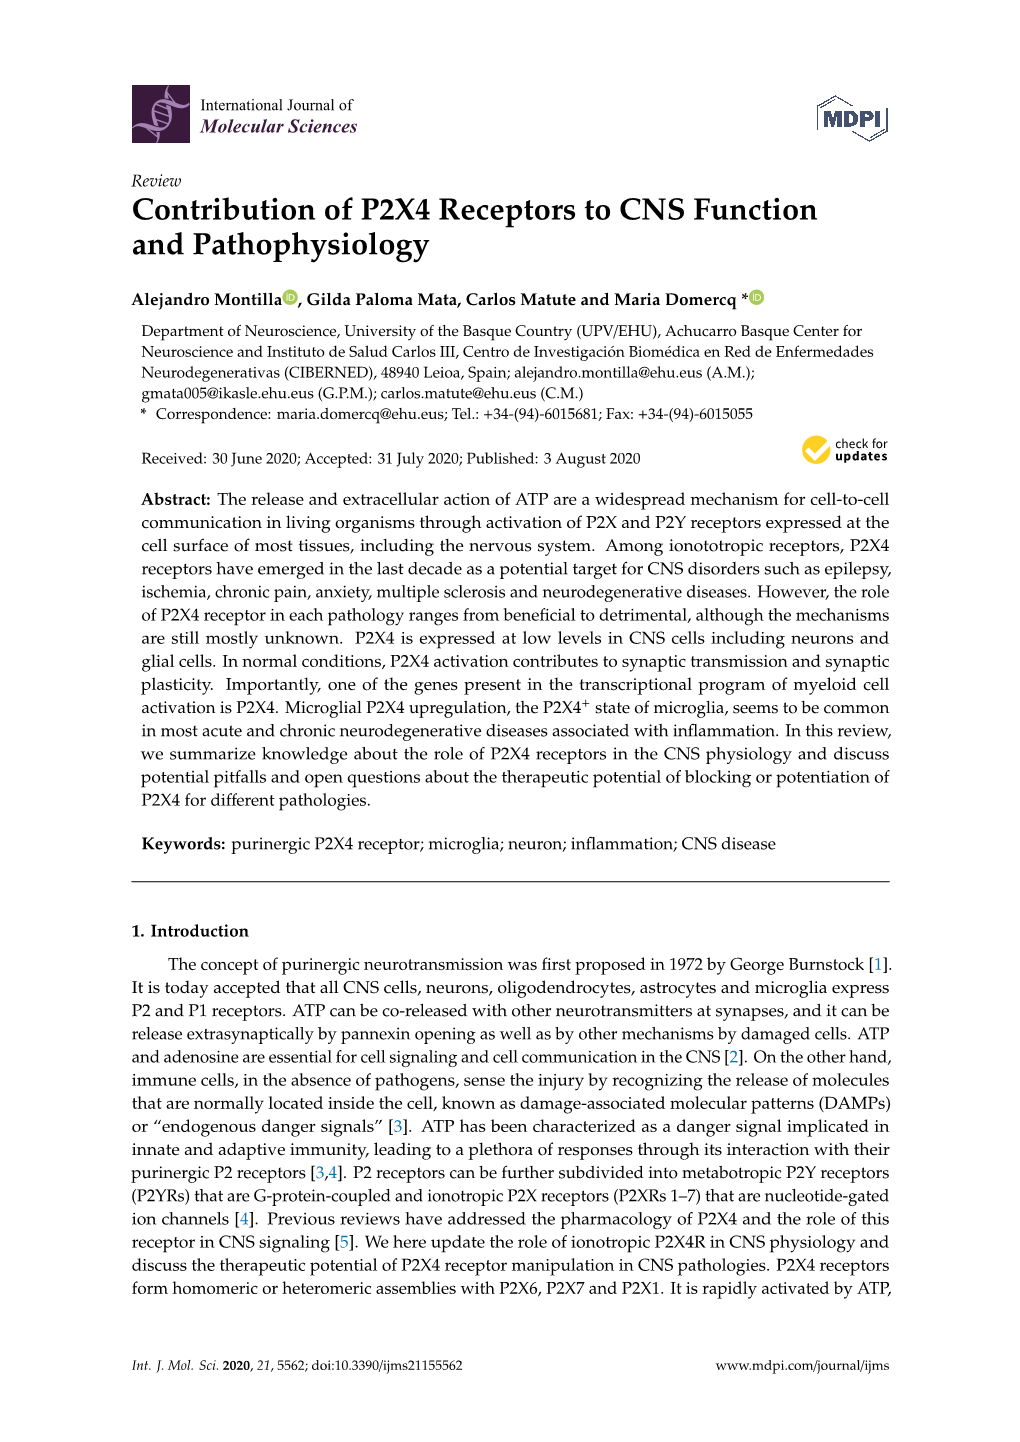 Contribution of P2X4 Receptors to CNS Function and Pathophysiology